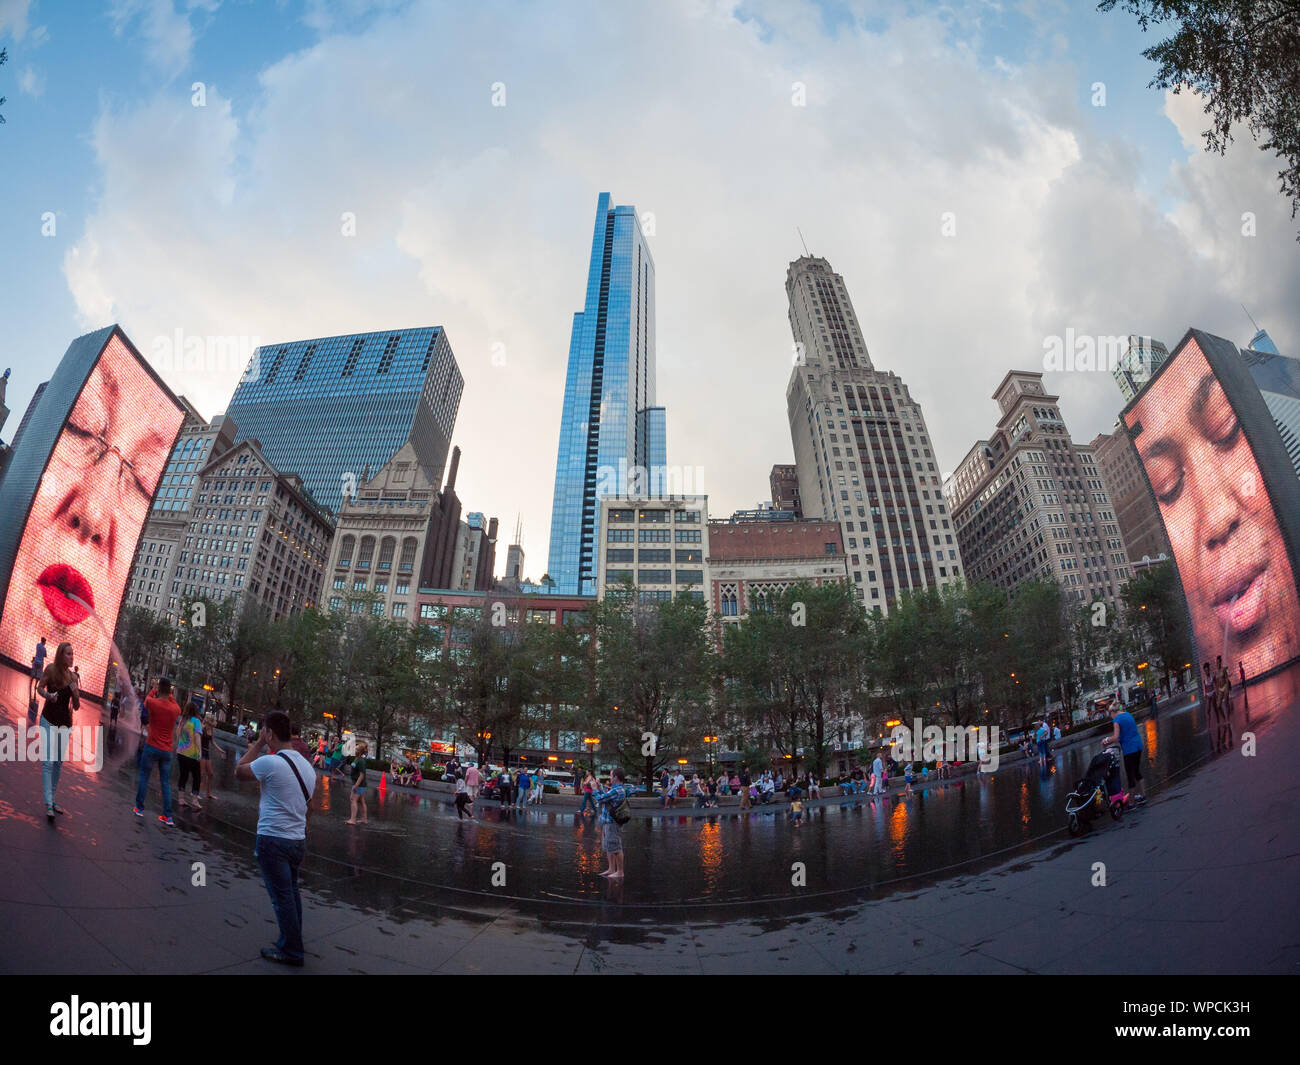 A wide angle, fisheye view of Jaume Plensa's popular Crown Fountain work of public art in Millennium Park, Chicago, Illinois. Stock Photo